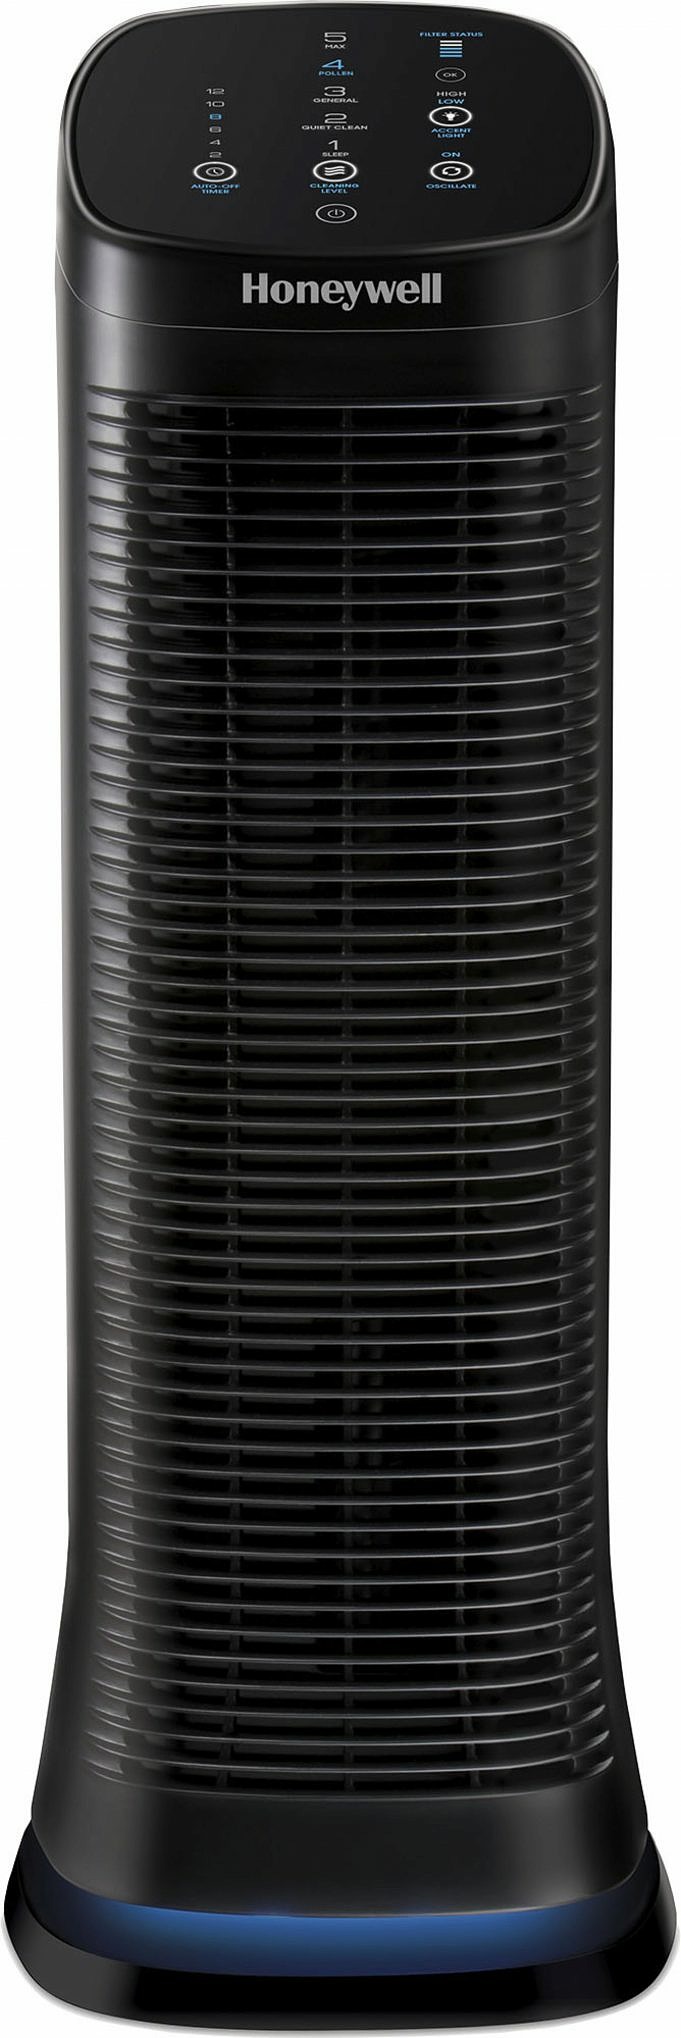 Honeywell AirGenius 5 HFD320 Air Cleaner/Odor Reducer Review